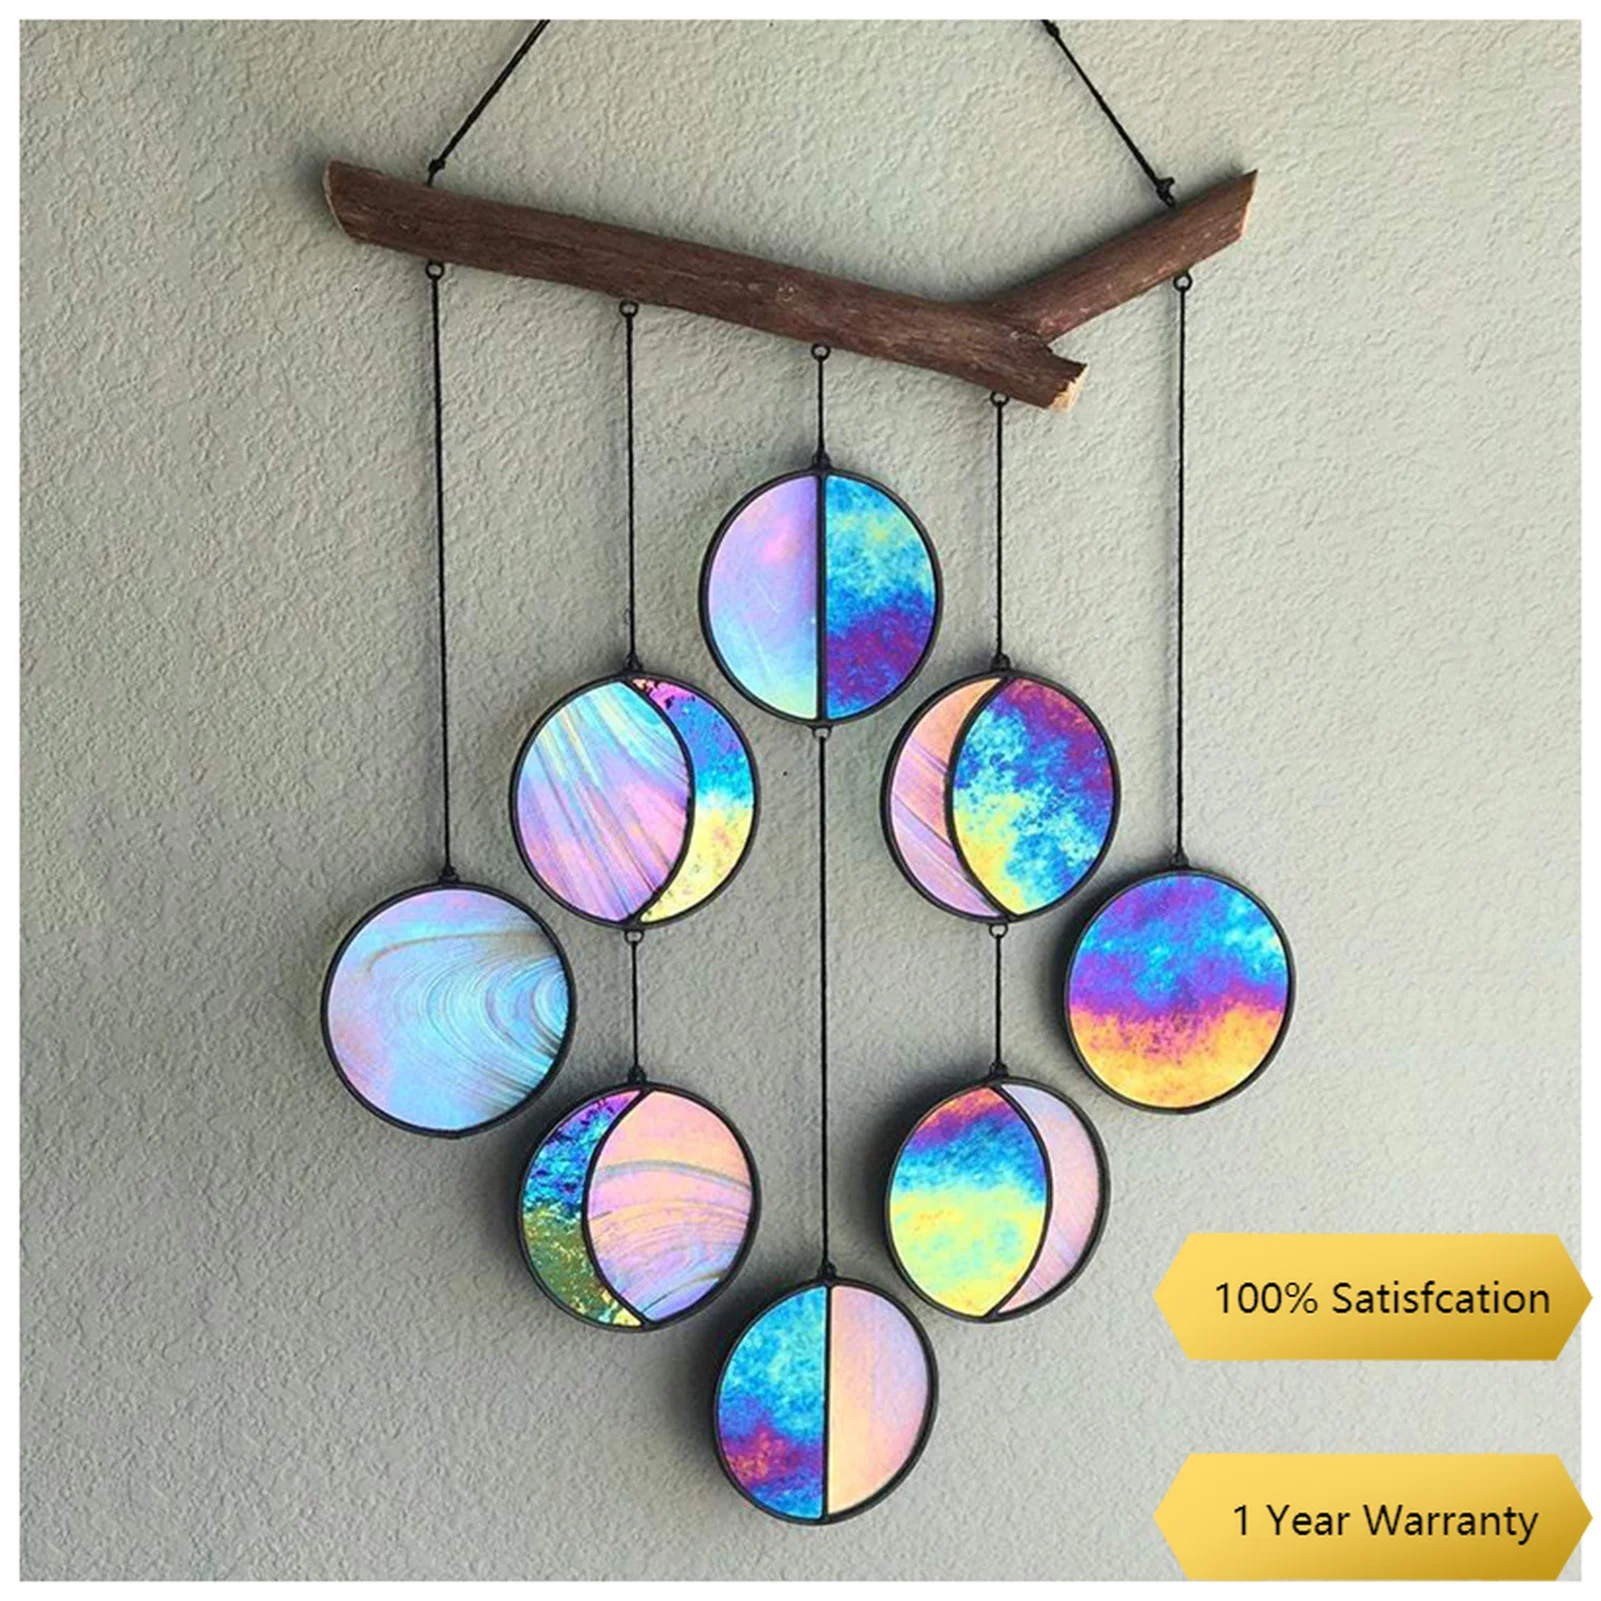 

Clear And Rainbow Iridized Hanging Art Wall Stained Glass Moon Phase Home nursery Decor dream catcher dreamcatcher wind chimes